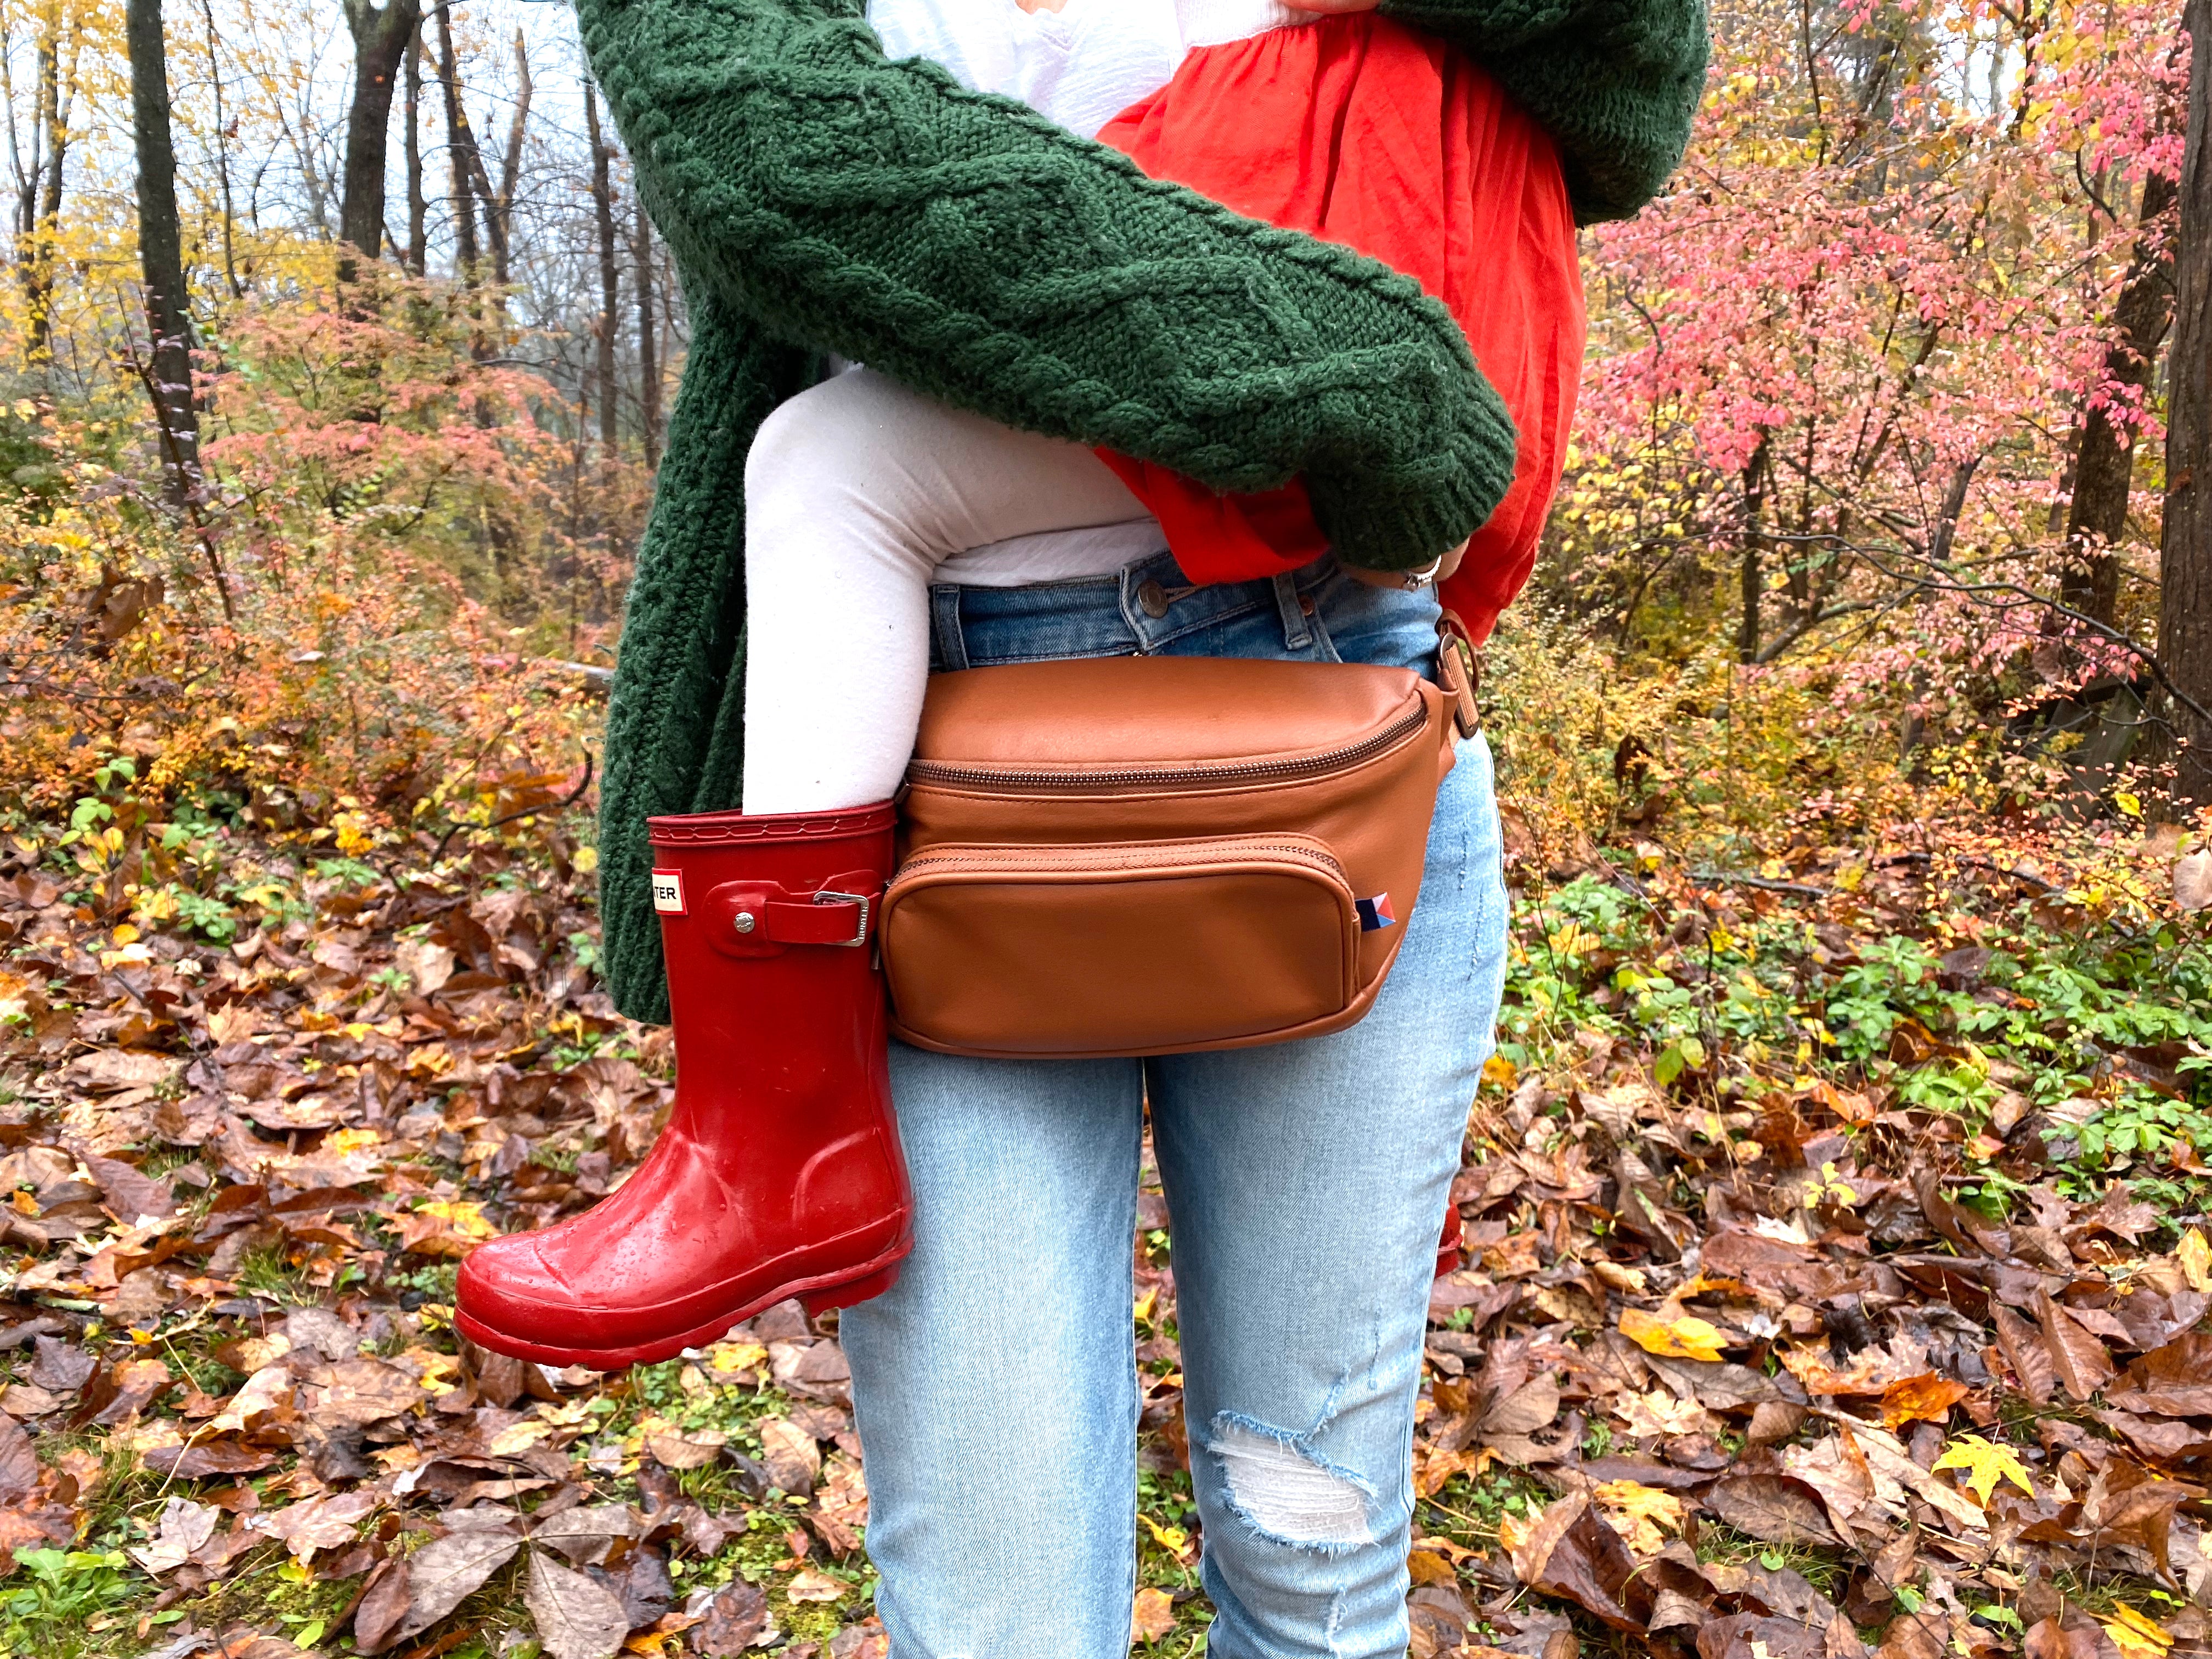 THE Diaper Bag Review Guide! - Collectively Casey